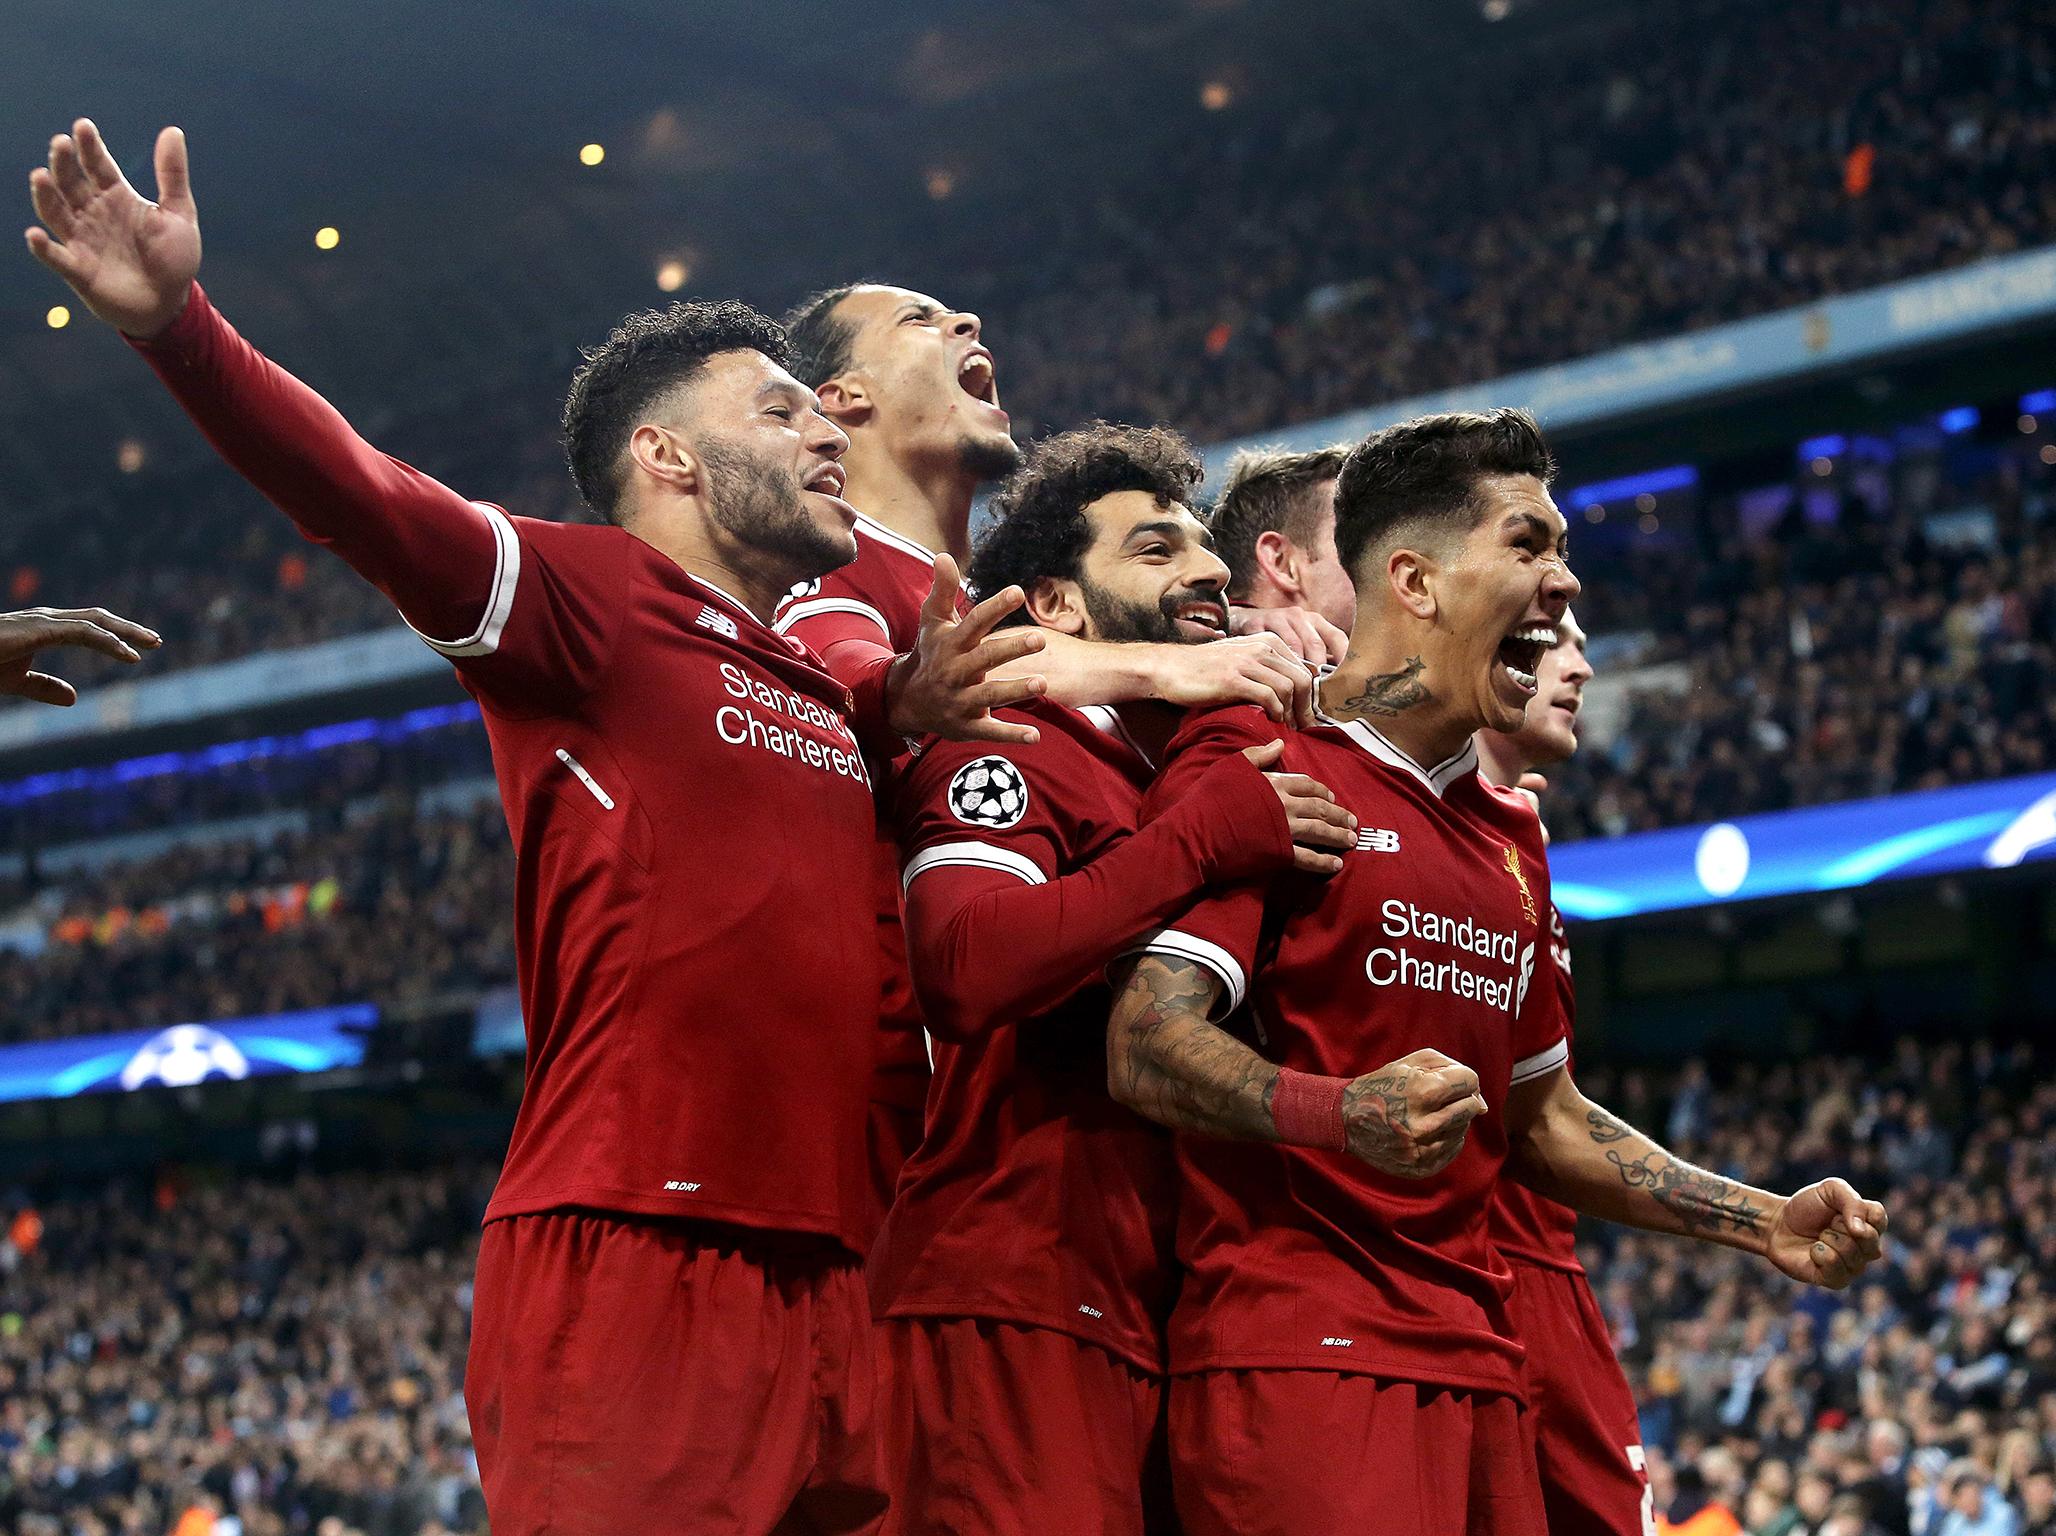 Liverpool rallied in the second-half to qualify for the last four